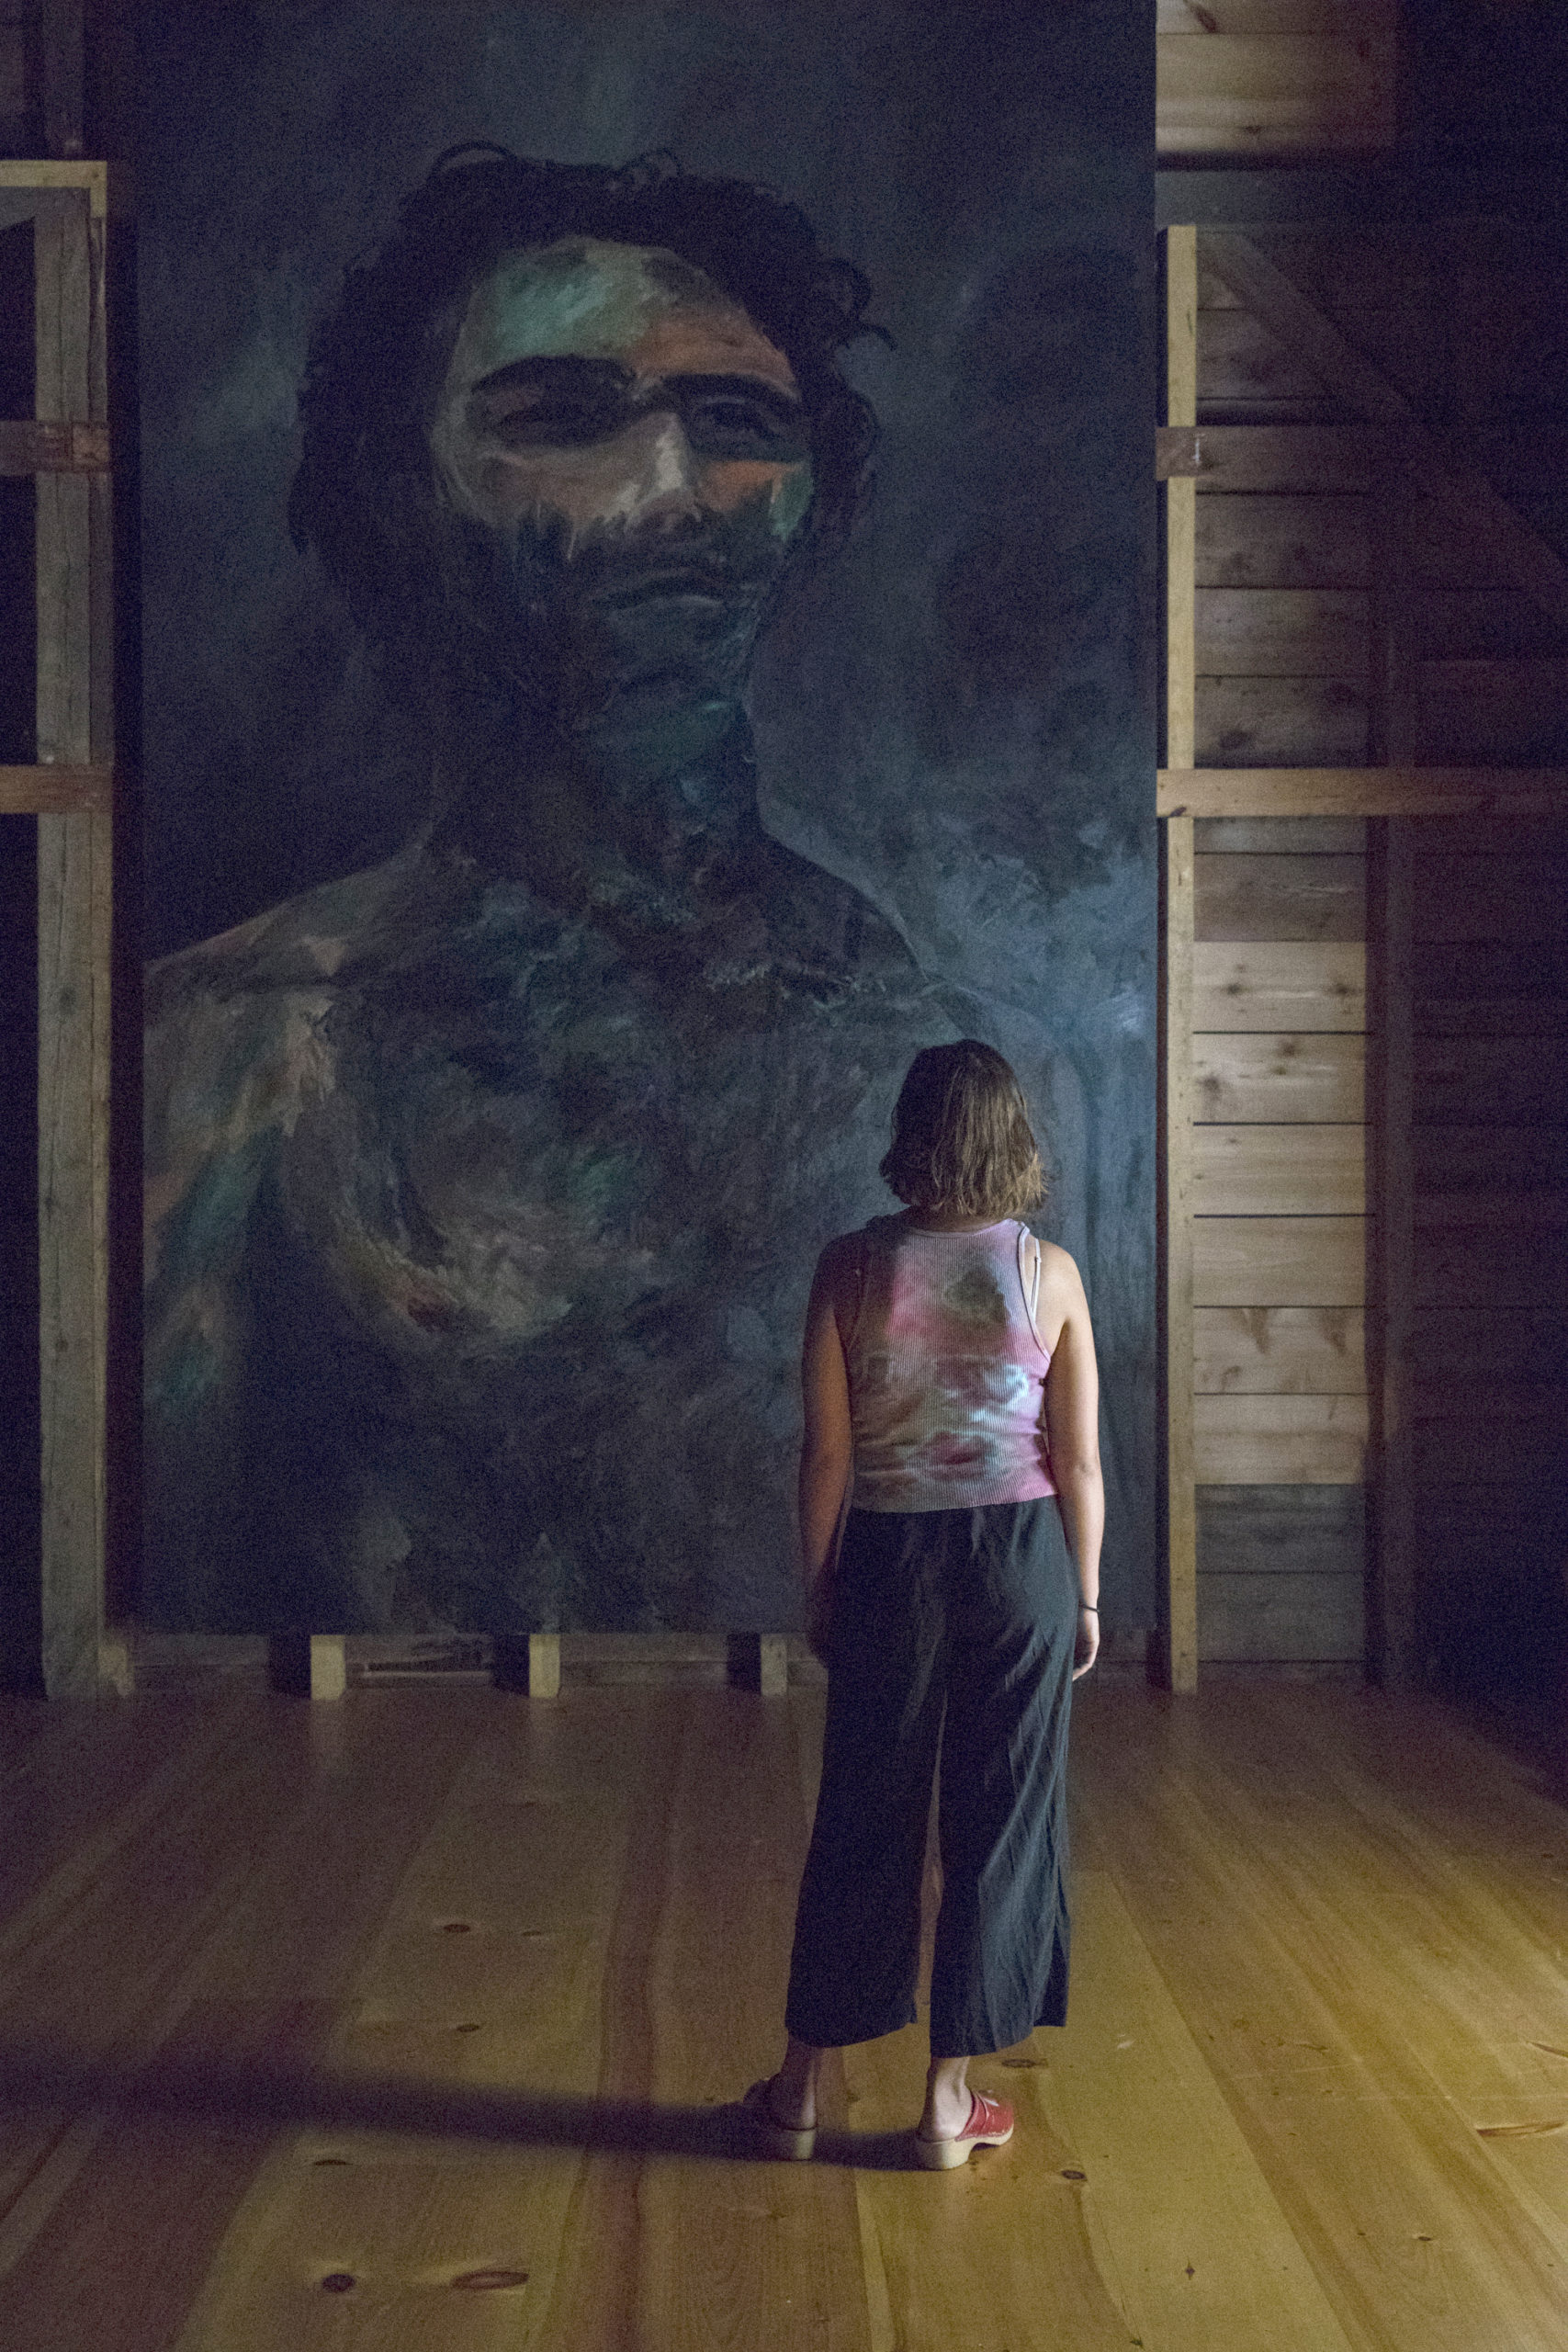 Darius Yektai’s exhibition, Darklight, opened to the public on September 5, at The Arts Center at Duck Creek IN sPRINGS. The exhibit includes six large-scale self portrait paintings.             LORI HAWKINS